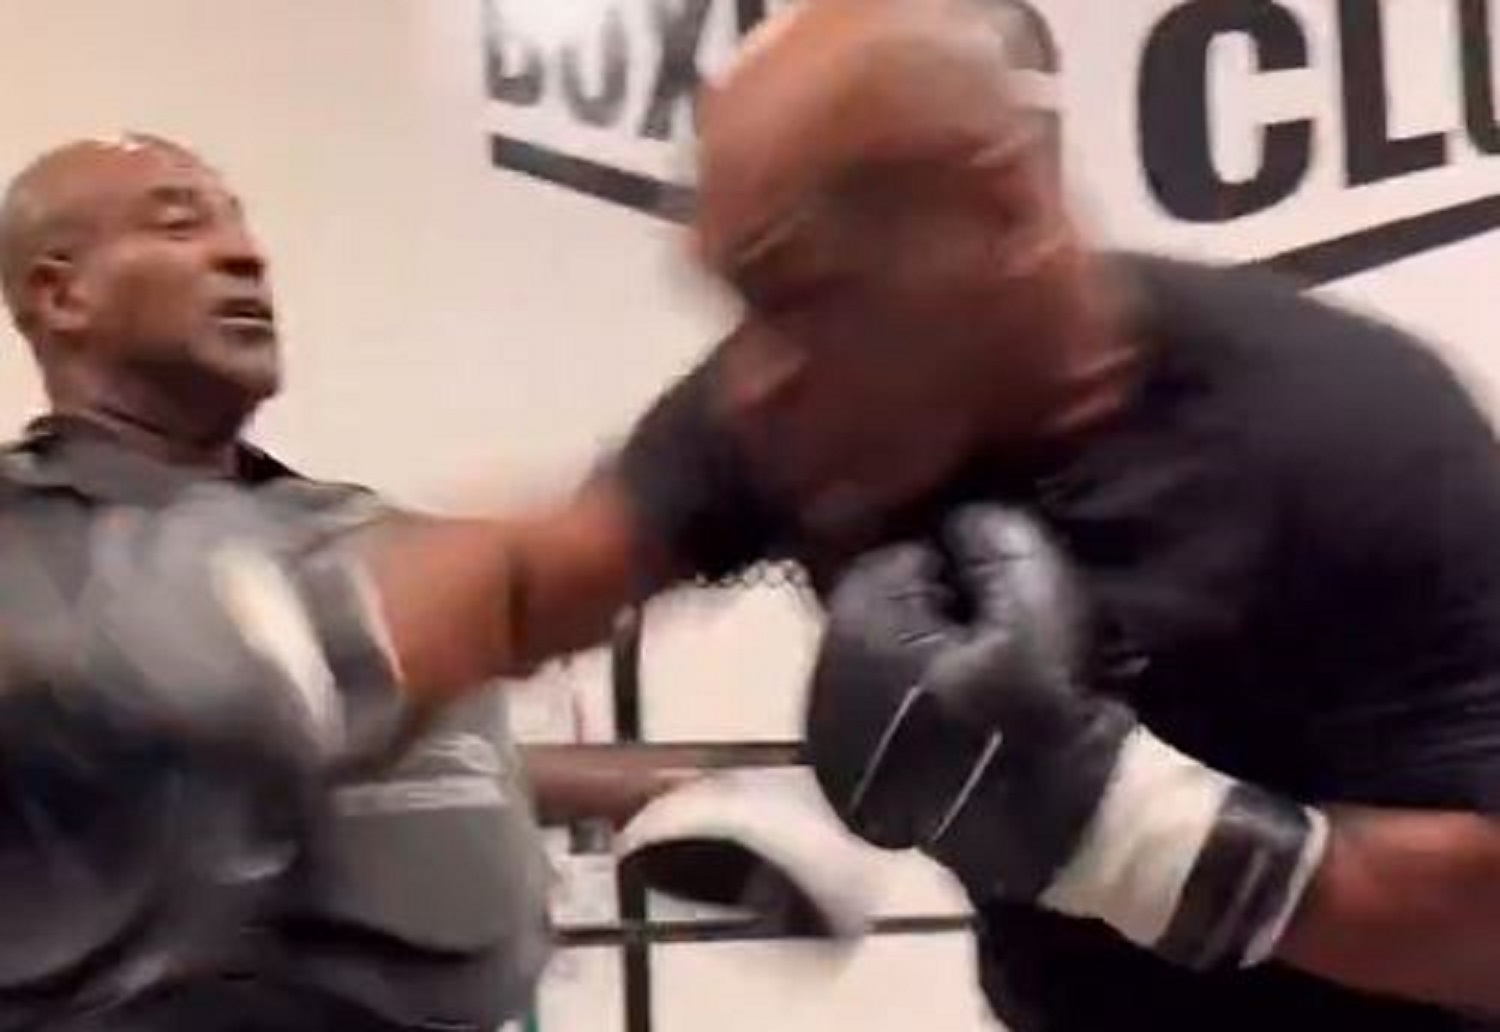 Watch: 57-Year-Old Mike Tyson Smashing The Pads With Ferocity Ahead Of Jake Paul Fight